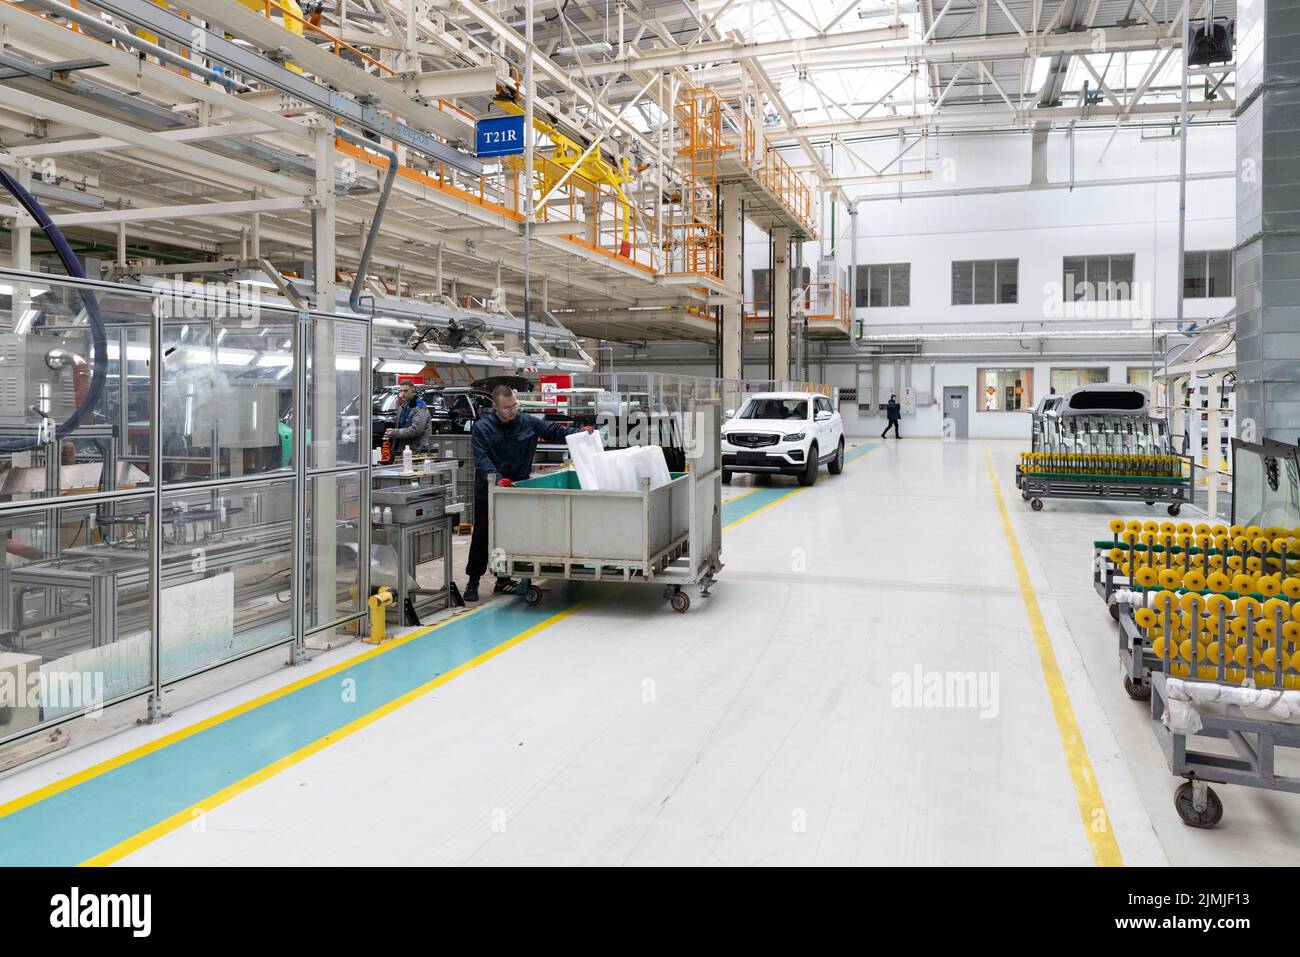 Minsk, Belarus - Dec 15, 2021: Car bodies are on assembly line. Factory for production of cars. Modern automotive industry. A ca Stock Photo